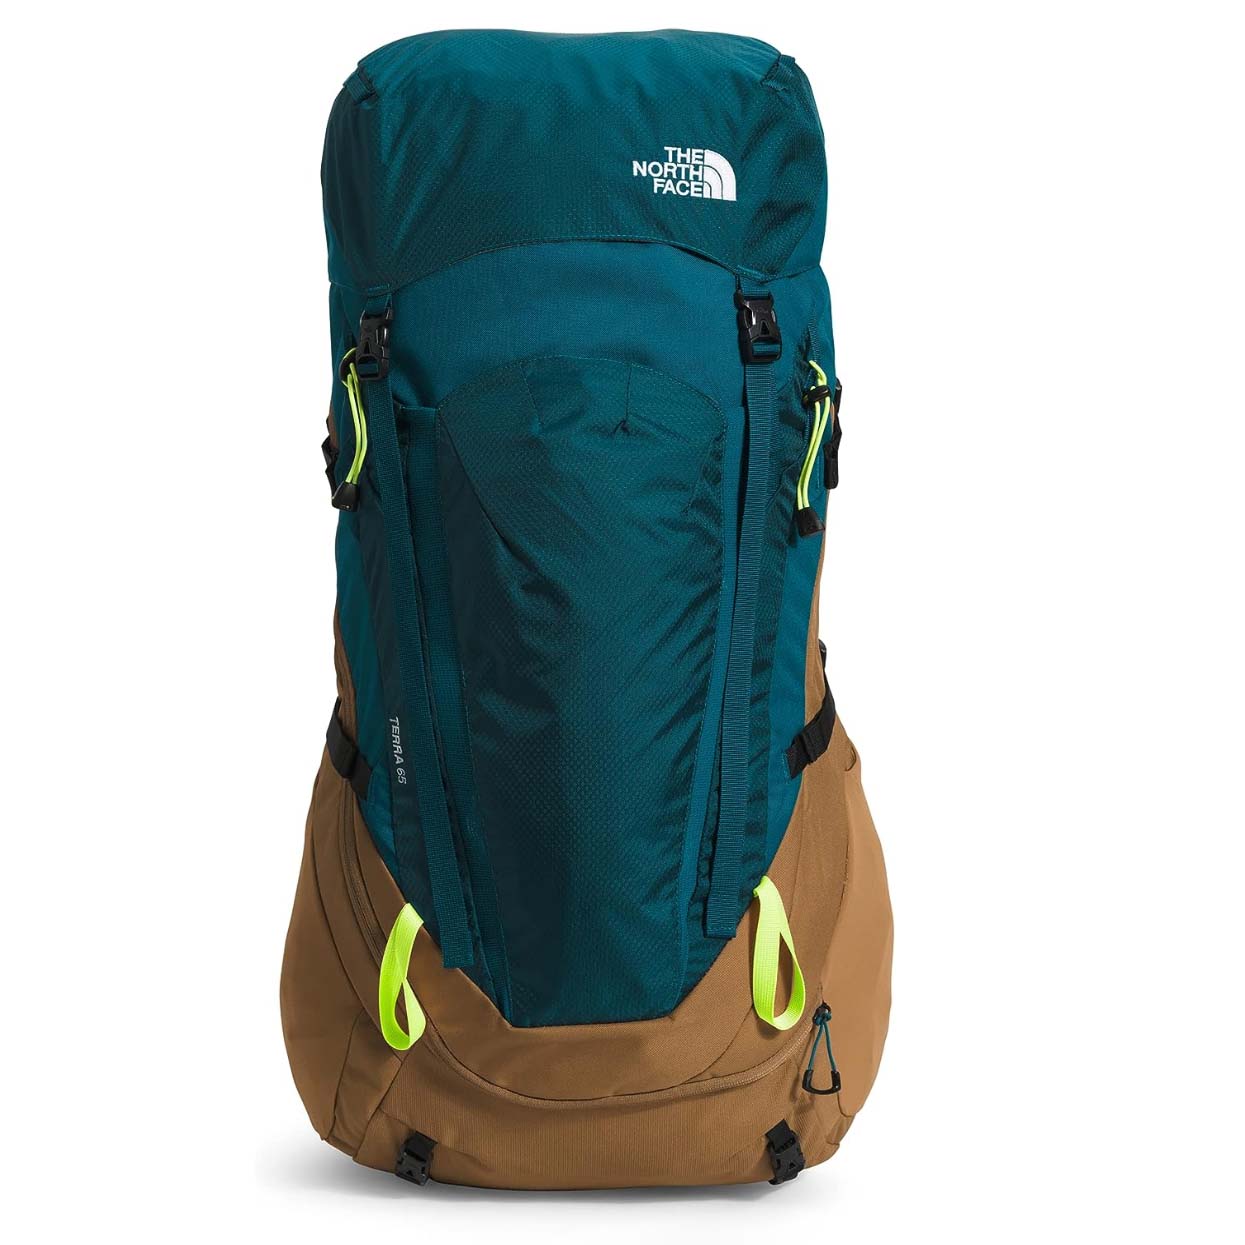 Northface outdoor backpack in coral green and brown